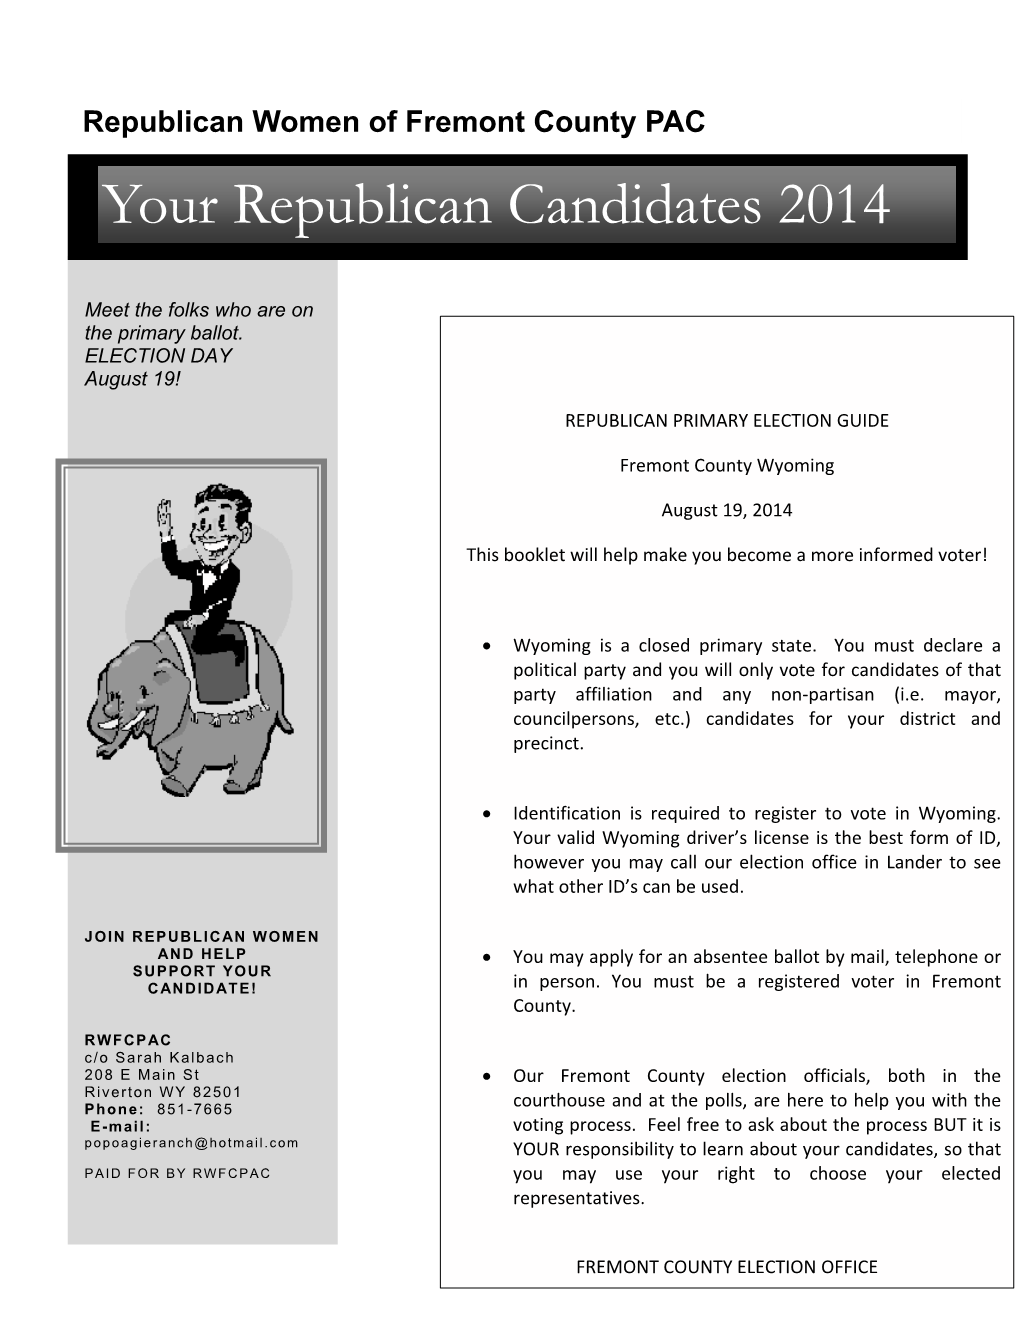 Your Republican Candidates 2014